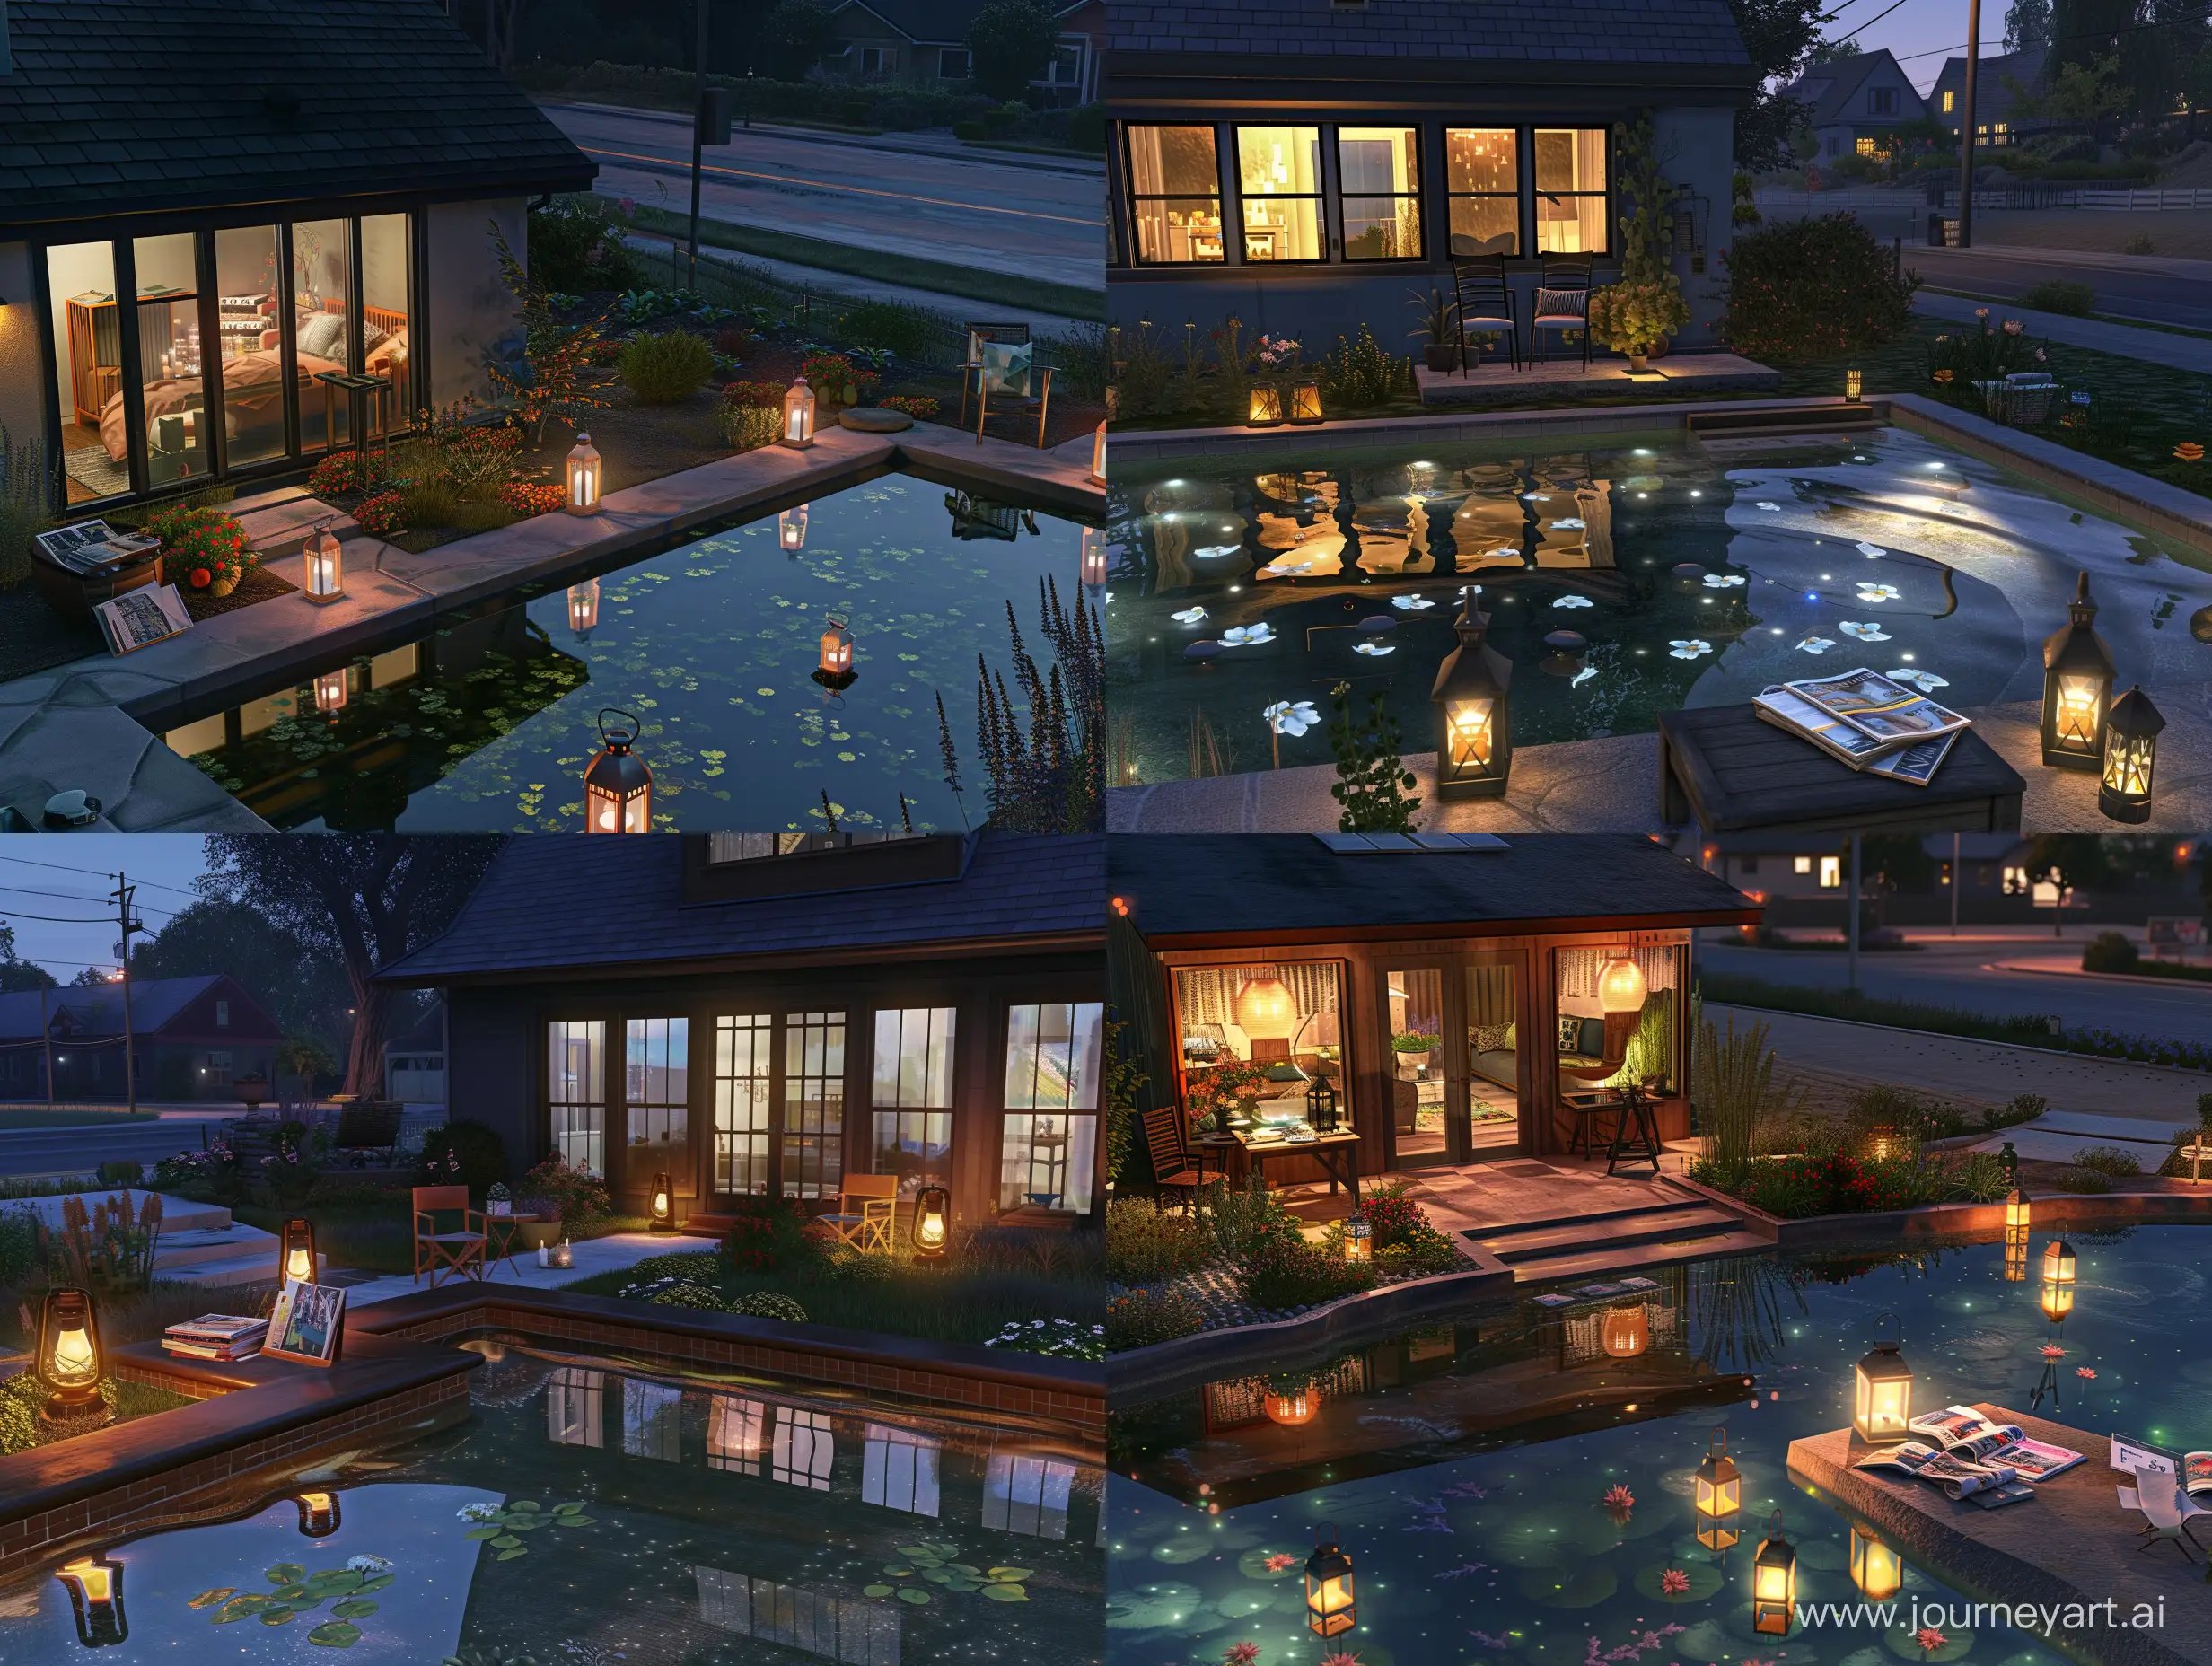 beautiful american style house with a roof, and windows, at night. a backyard with gardens, and small swimming pool, with edging and small steps. modern lanterns reflecting in the clear transparent water. near is a little table with magazines and candles. there are two chairs near the table. A street in the background.low horizon line. 8 to ultrarealism, unreal engine, clear objects, big beautiful night skies